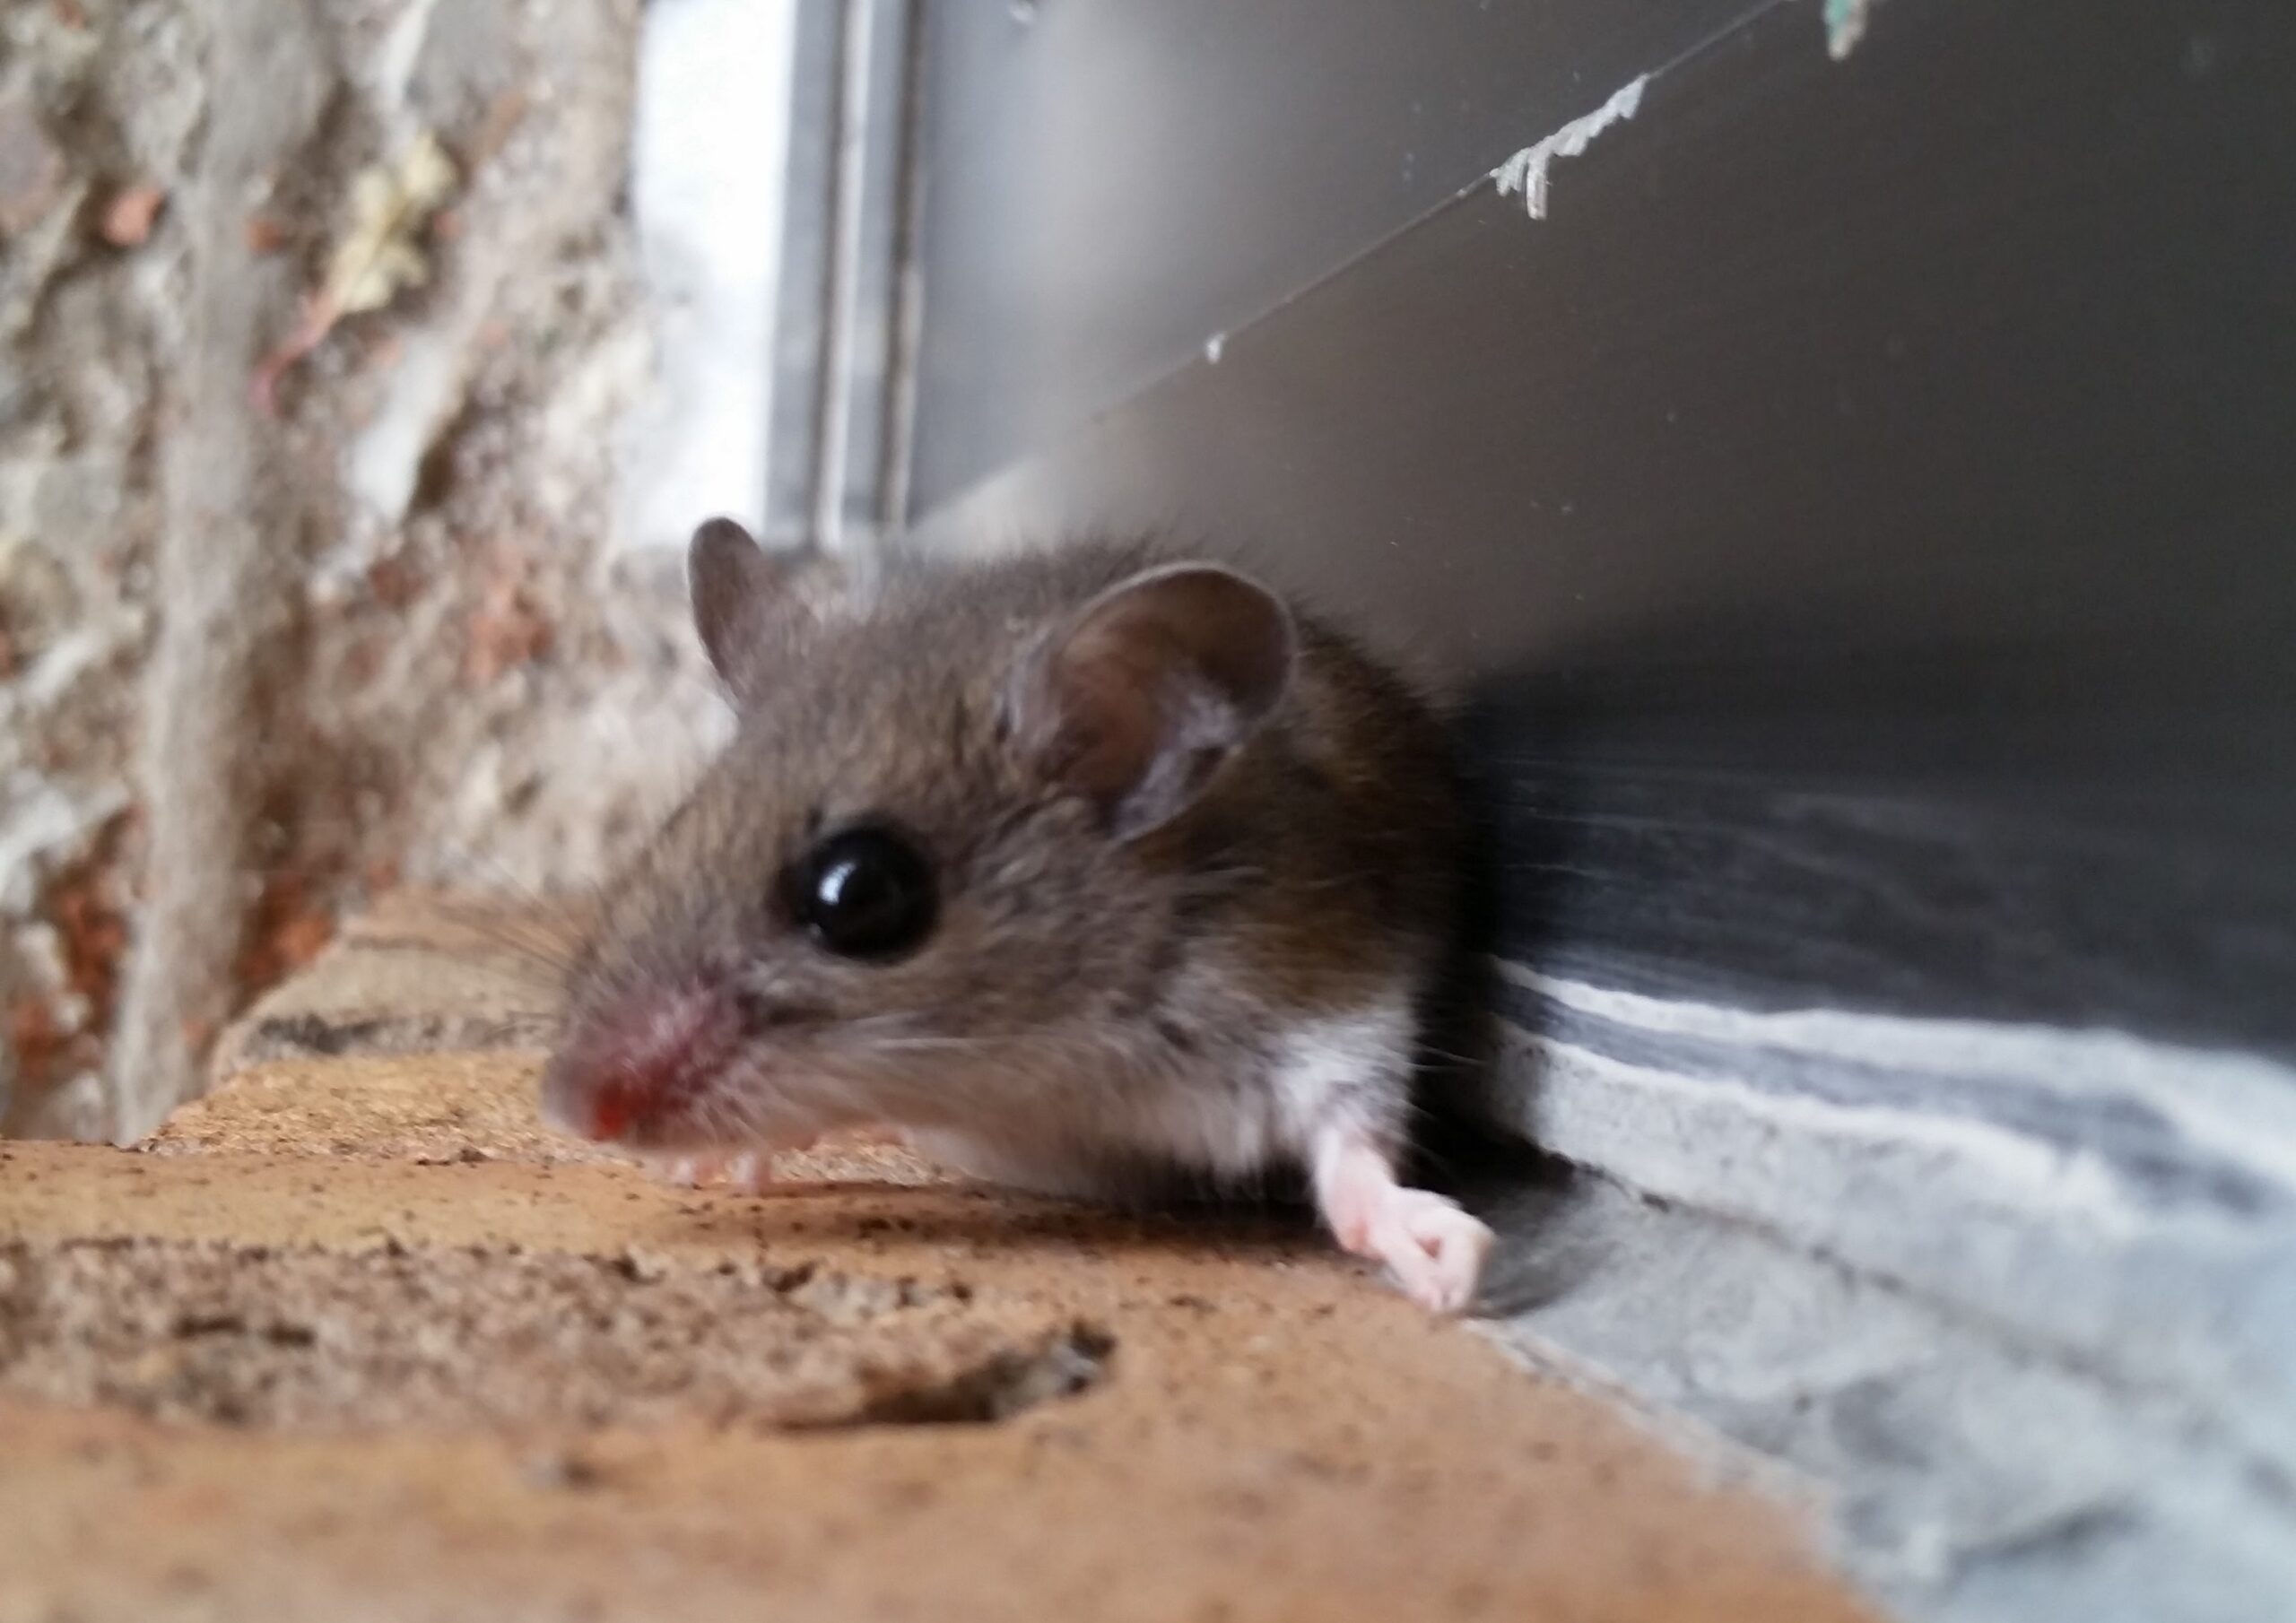 What Is Rodent Season and How Long Does It Last?